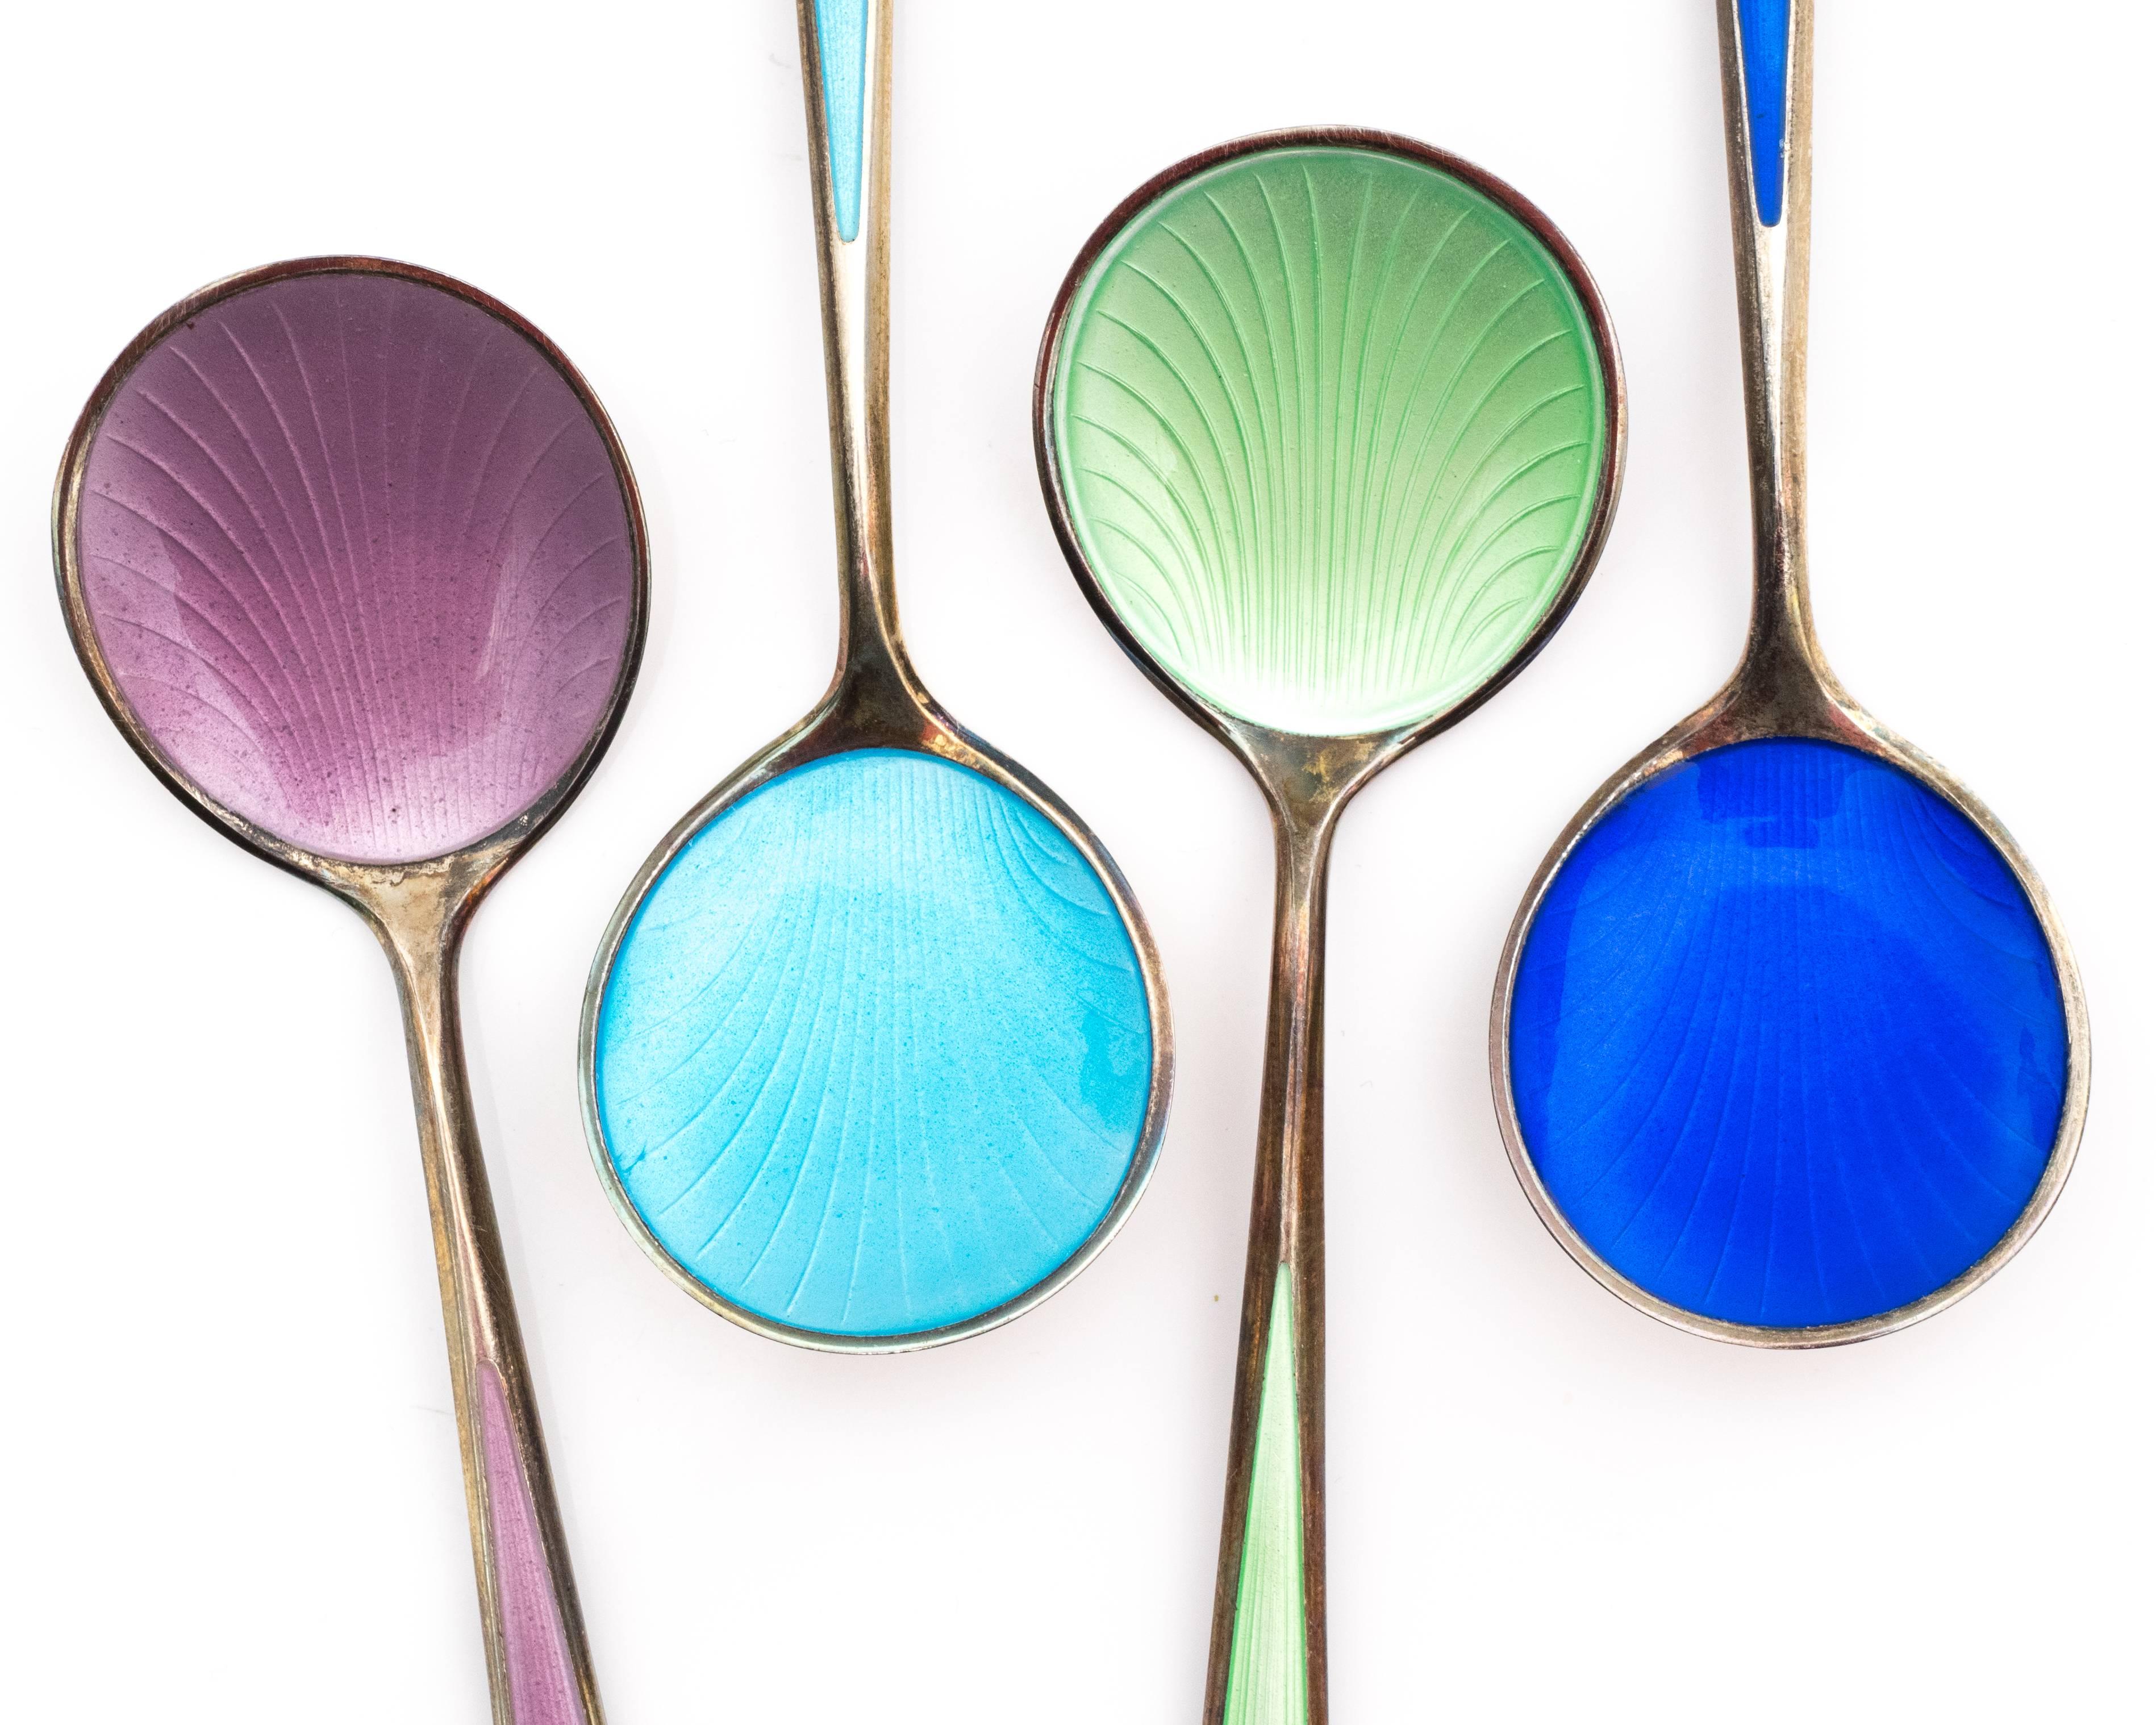 This 1930s teaspoon set comes with 8 teaspoons. All the spoons vary in pastel and deep hues with a seashell pattern embedded in the enamel. The sterling silver has not been polished recently, but could be for a cleaner look. Request complementary